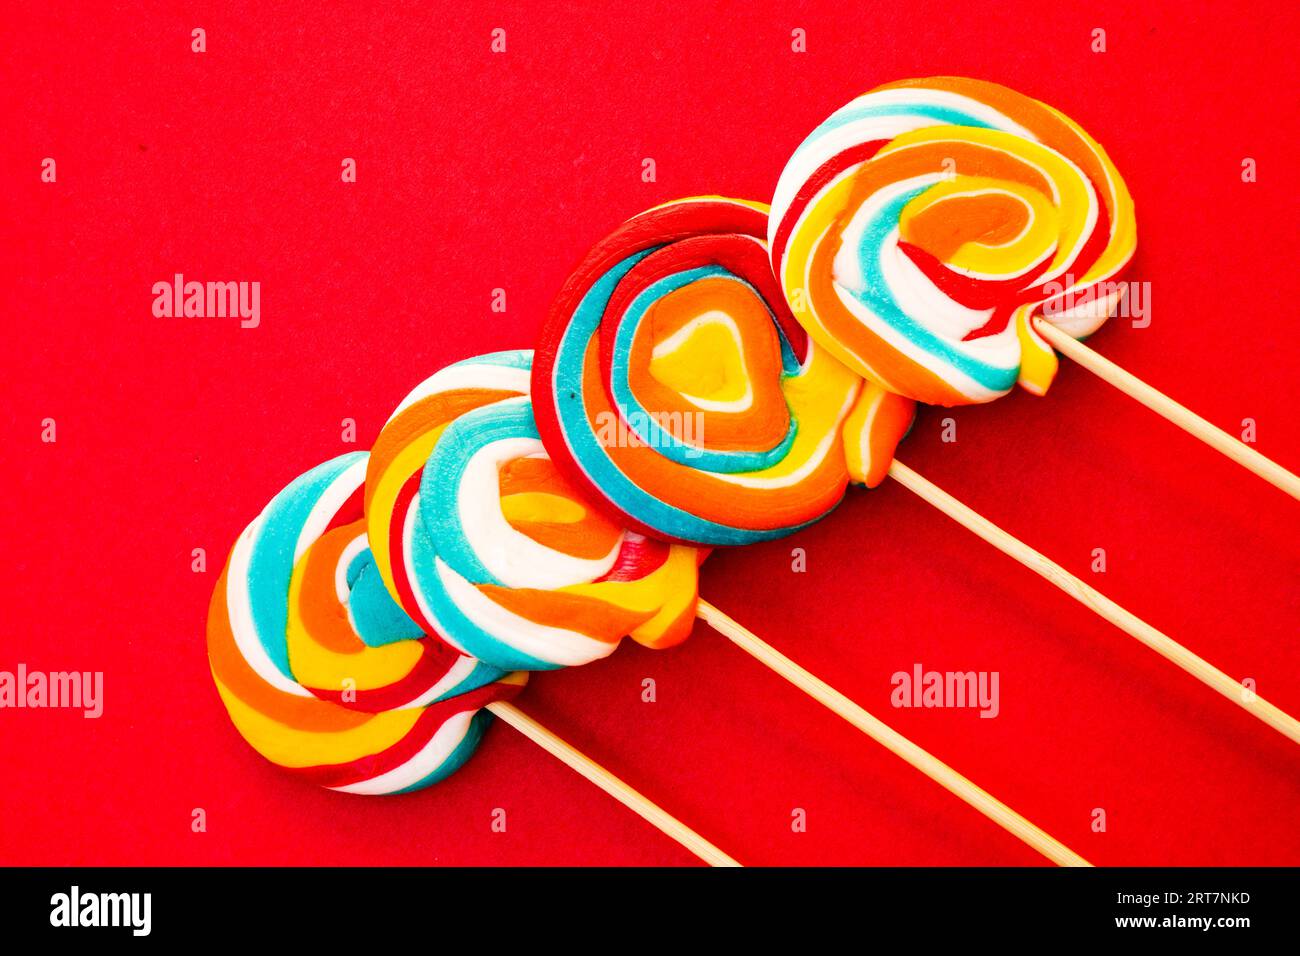 Colorful spiral lollipop candy on stick. On a red background. Stock Photo